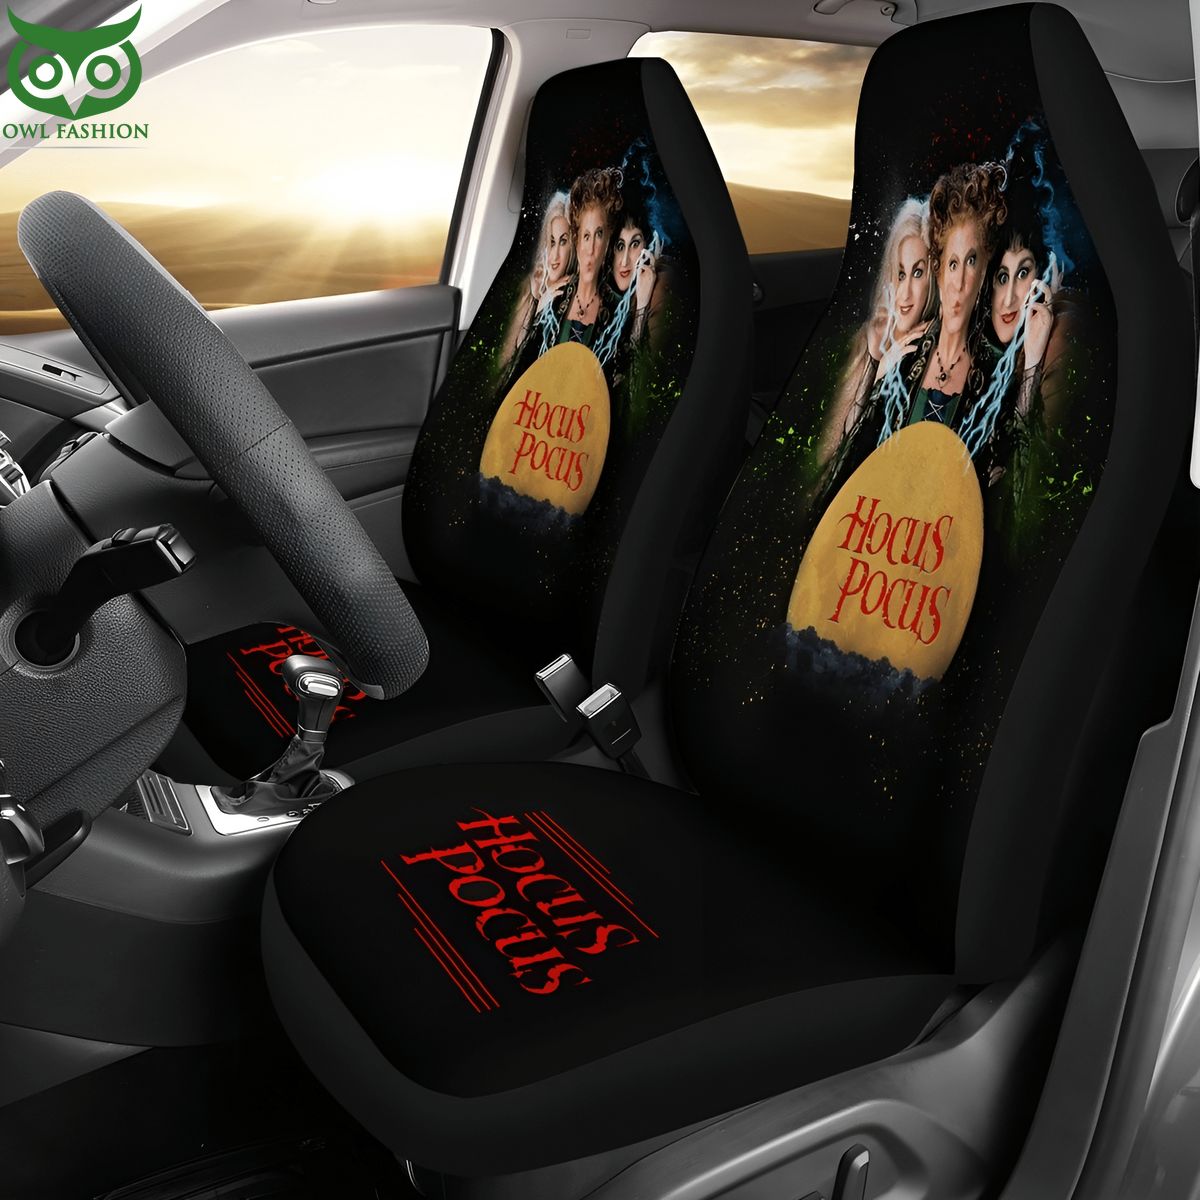 hocus pocus characters car seat cover 1 LnyMv.jpg